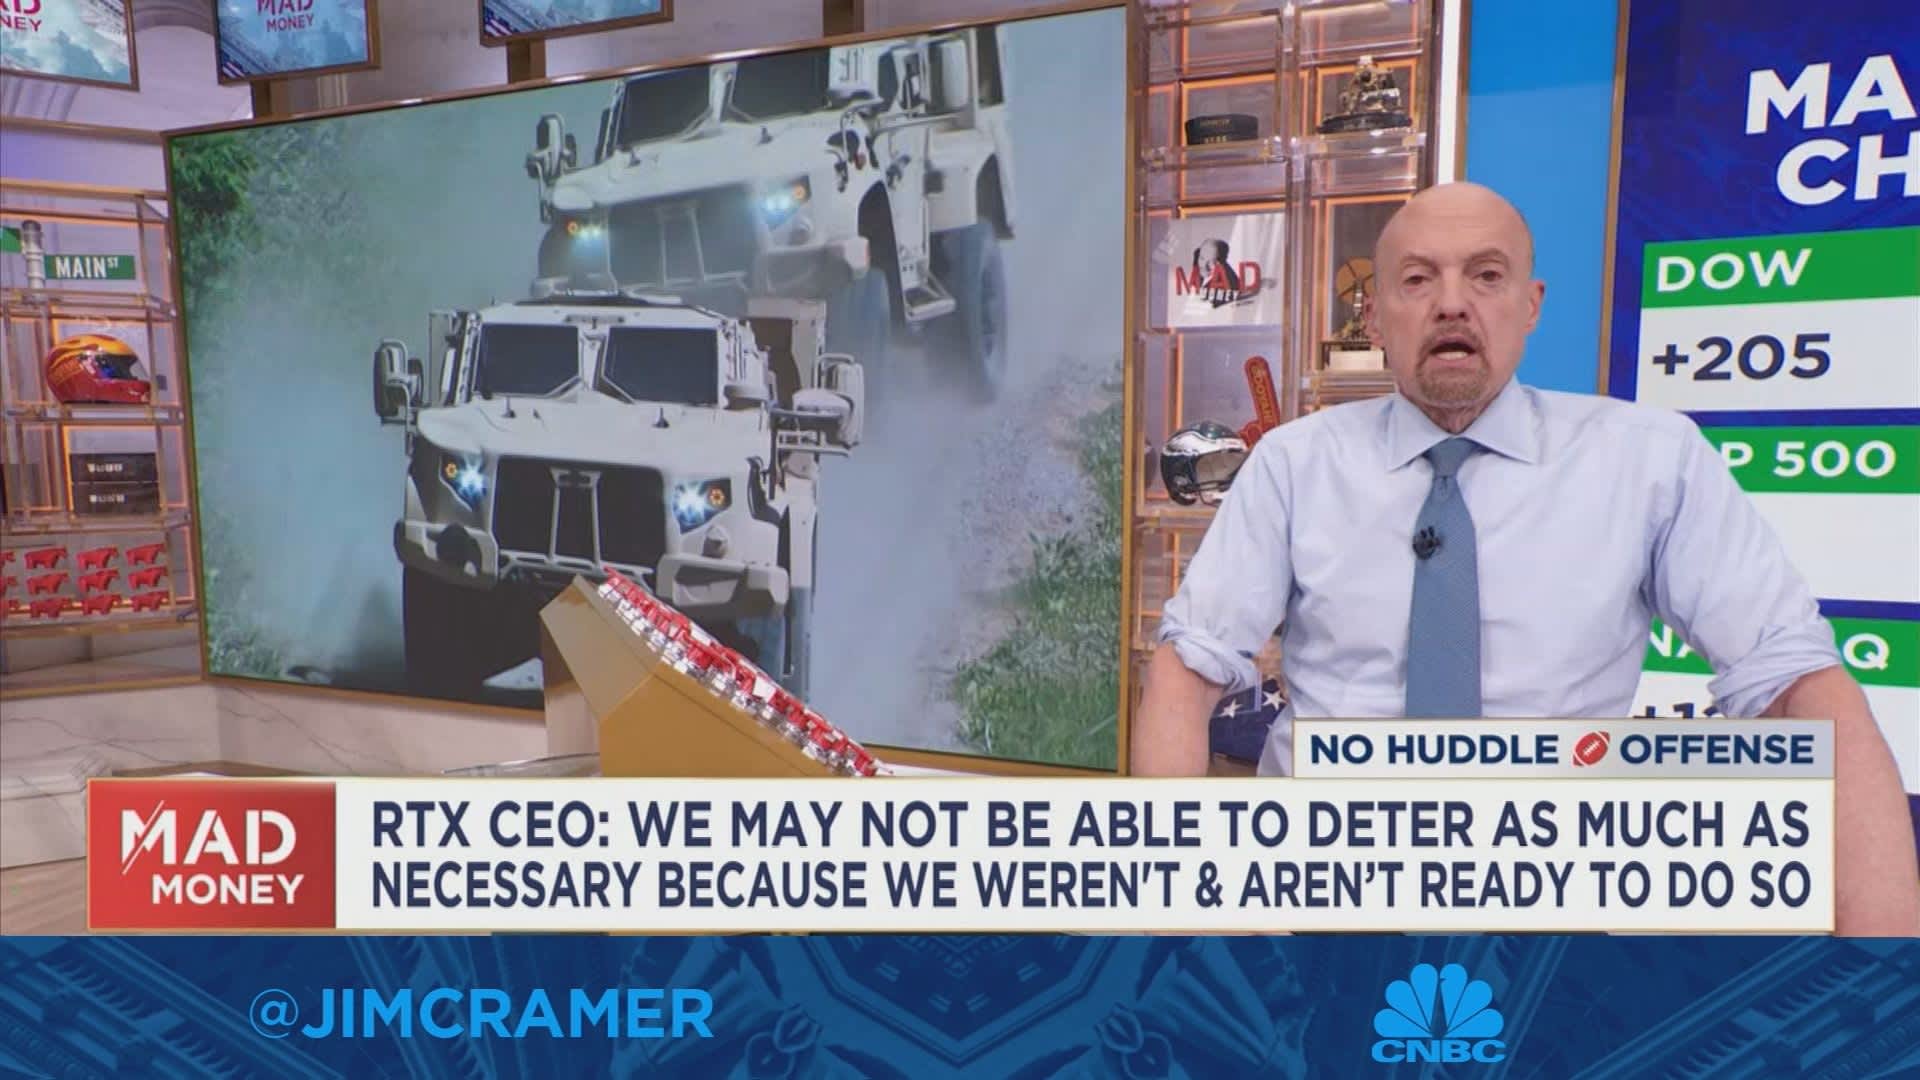 It's likely the big five defense companies will pivot if the pentagon asks them to, says Jim Cramer